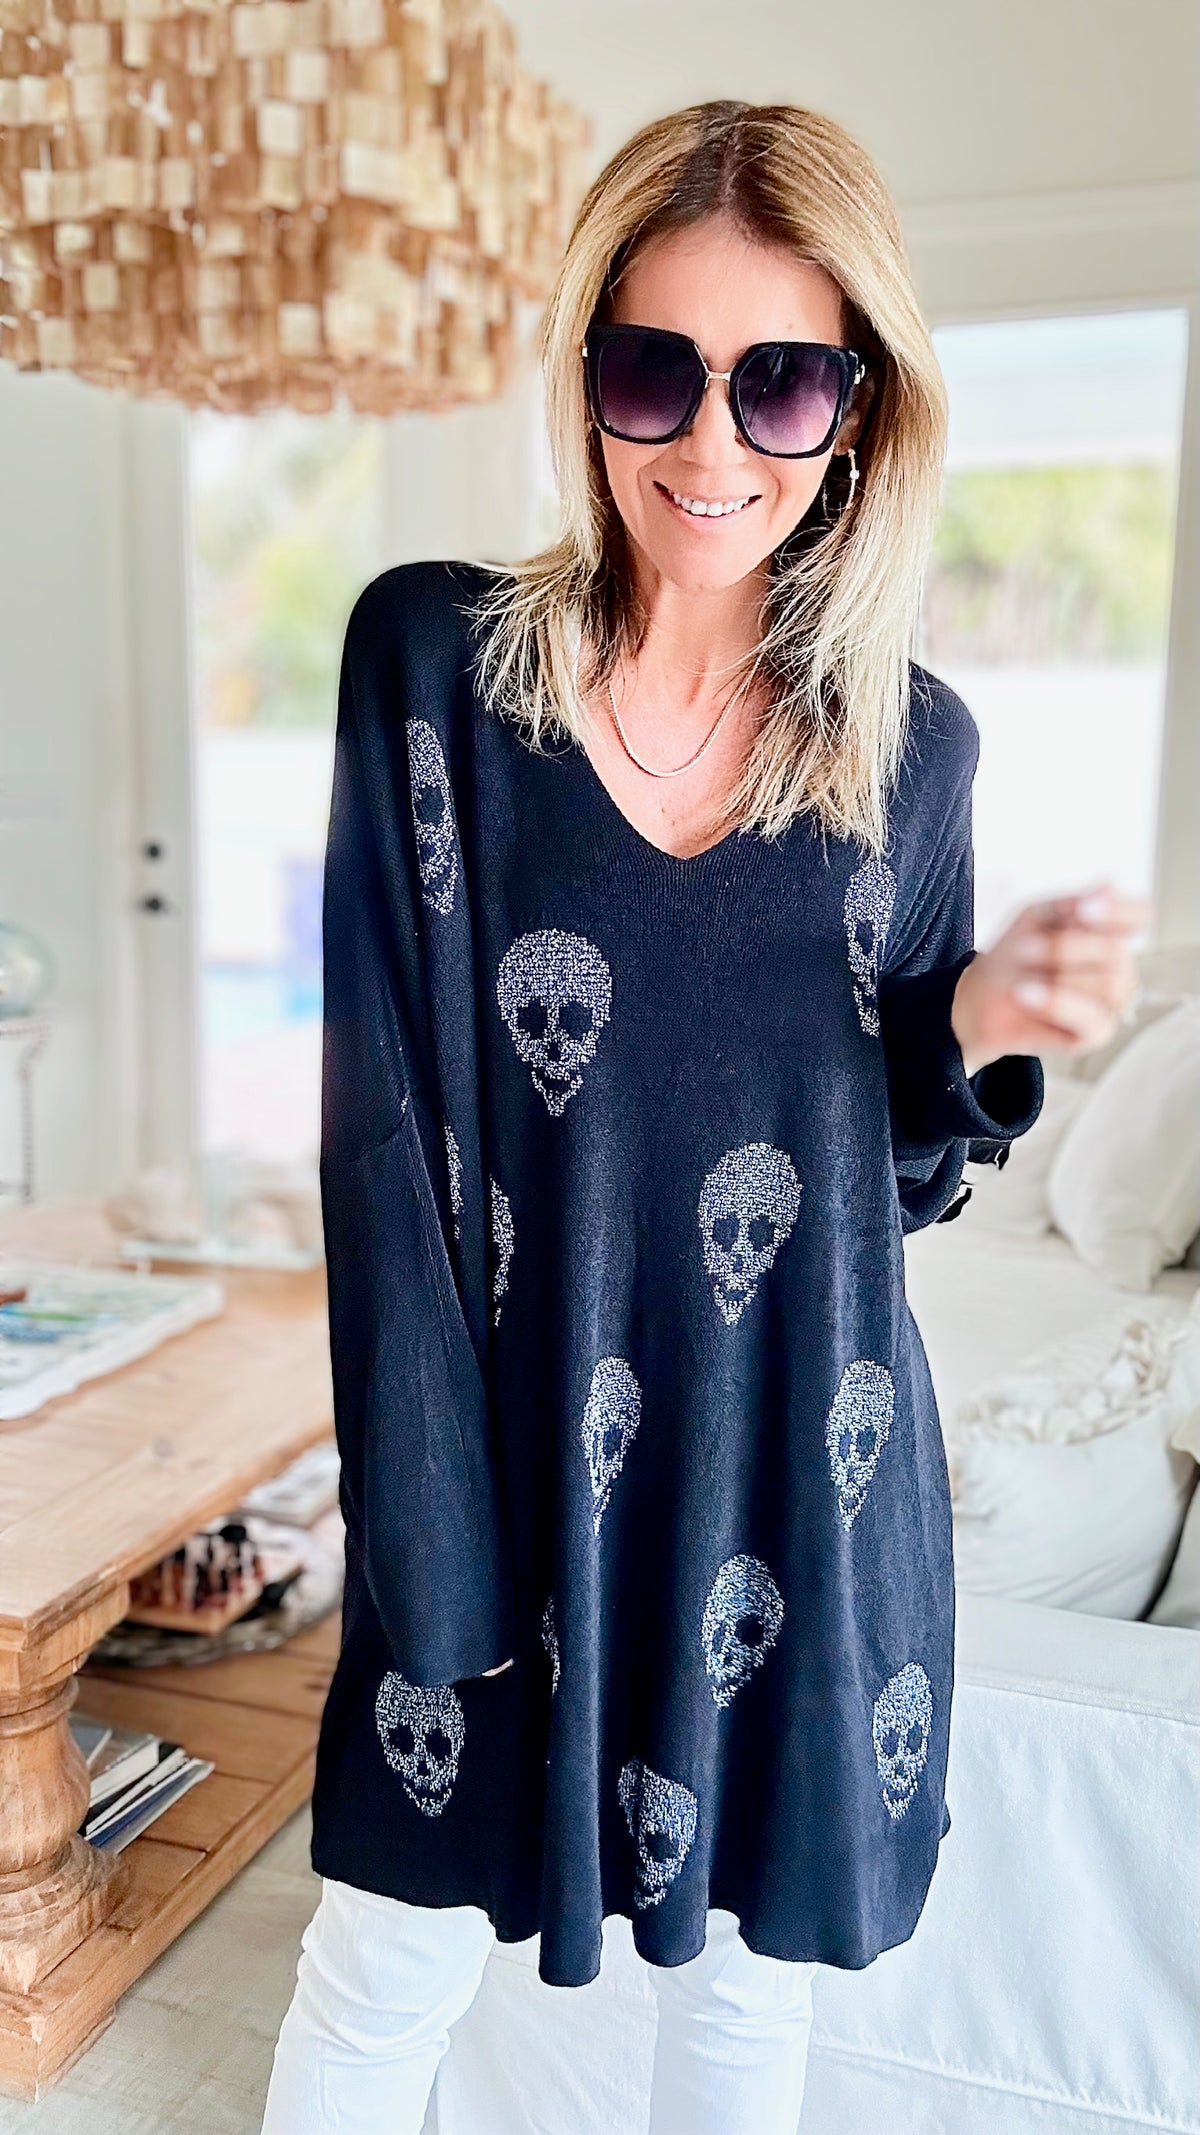 Skull V-Neck Italian Tunic - Black-200 dresses/jumpsuits/rompers-Venti6-Coastal Bloom Boutique, find the trendiest versions of the popular styles and looks Located in Indialantic, FL